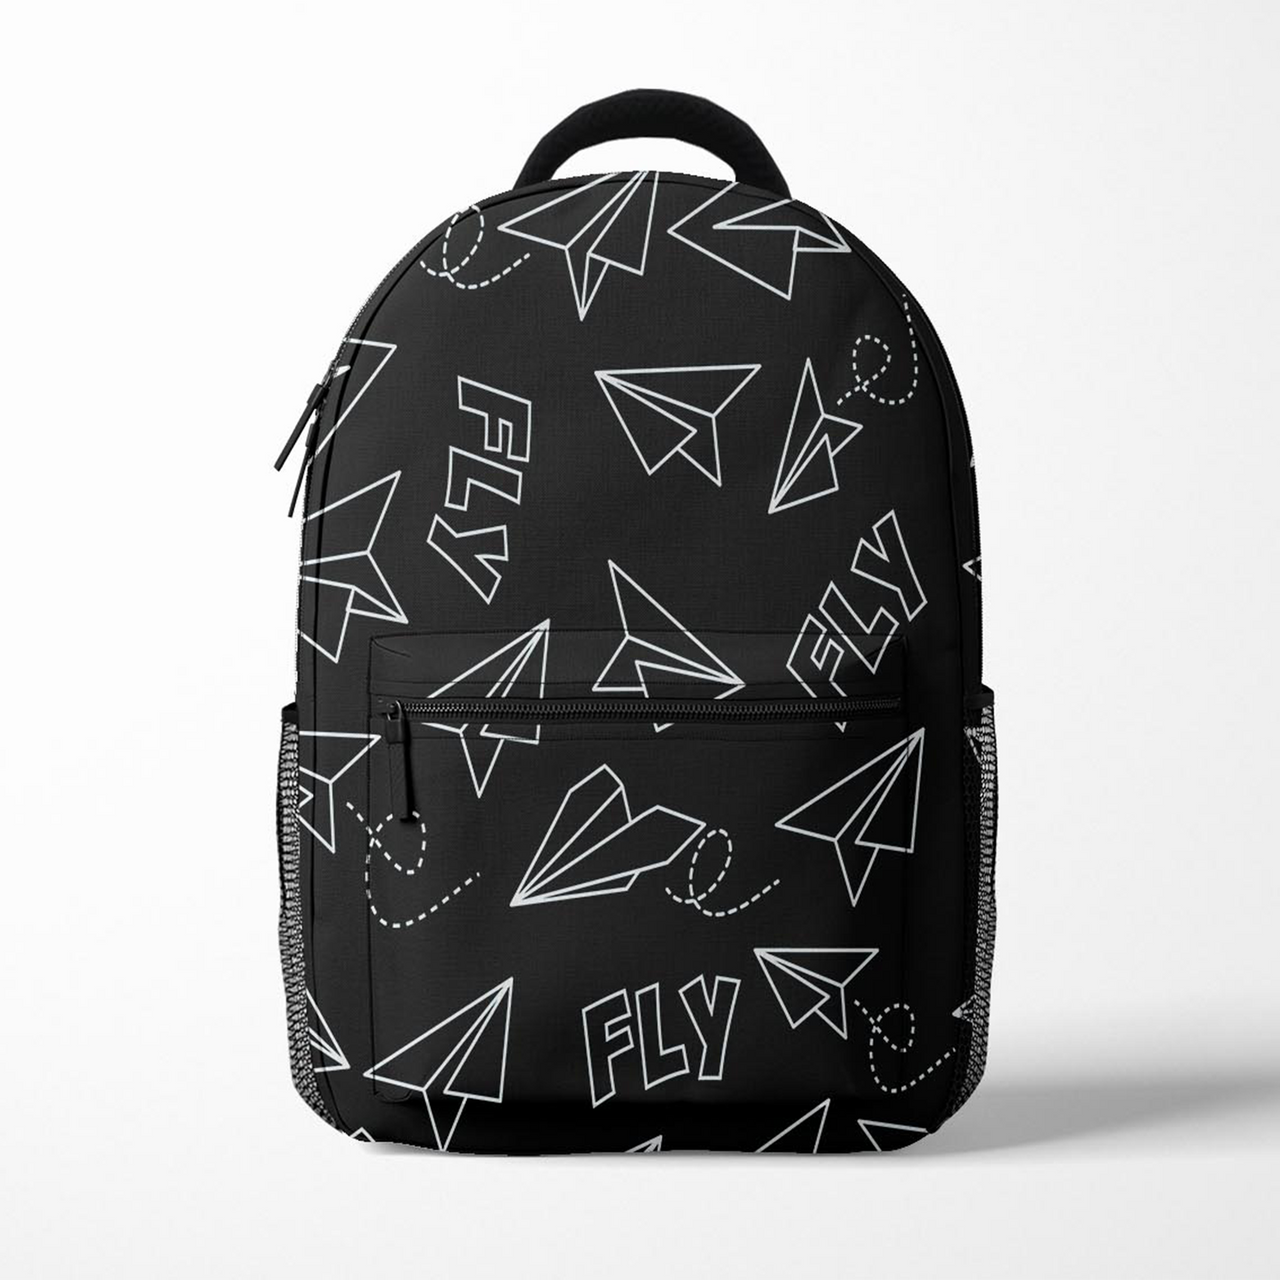 Paper Airplane & Fly (5 Colors) Designed 3D Backpacks